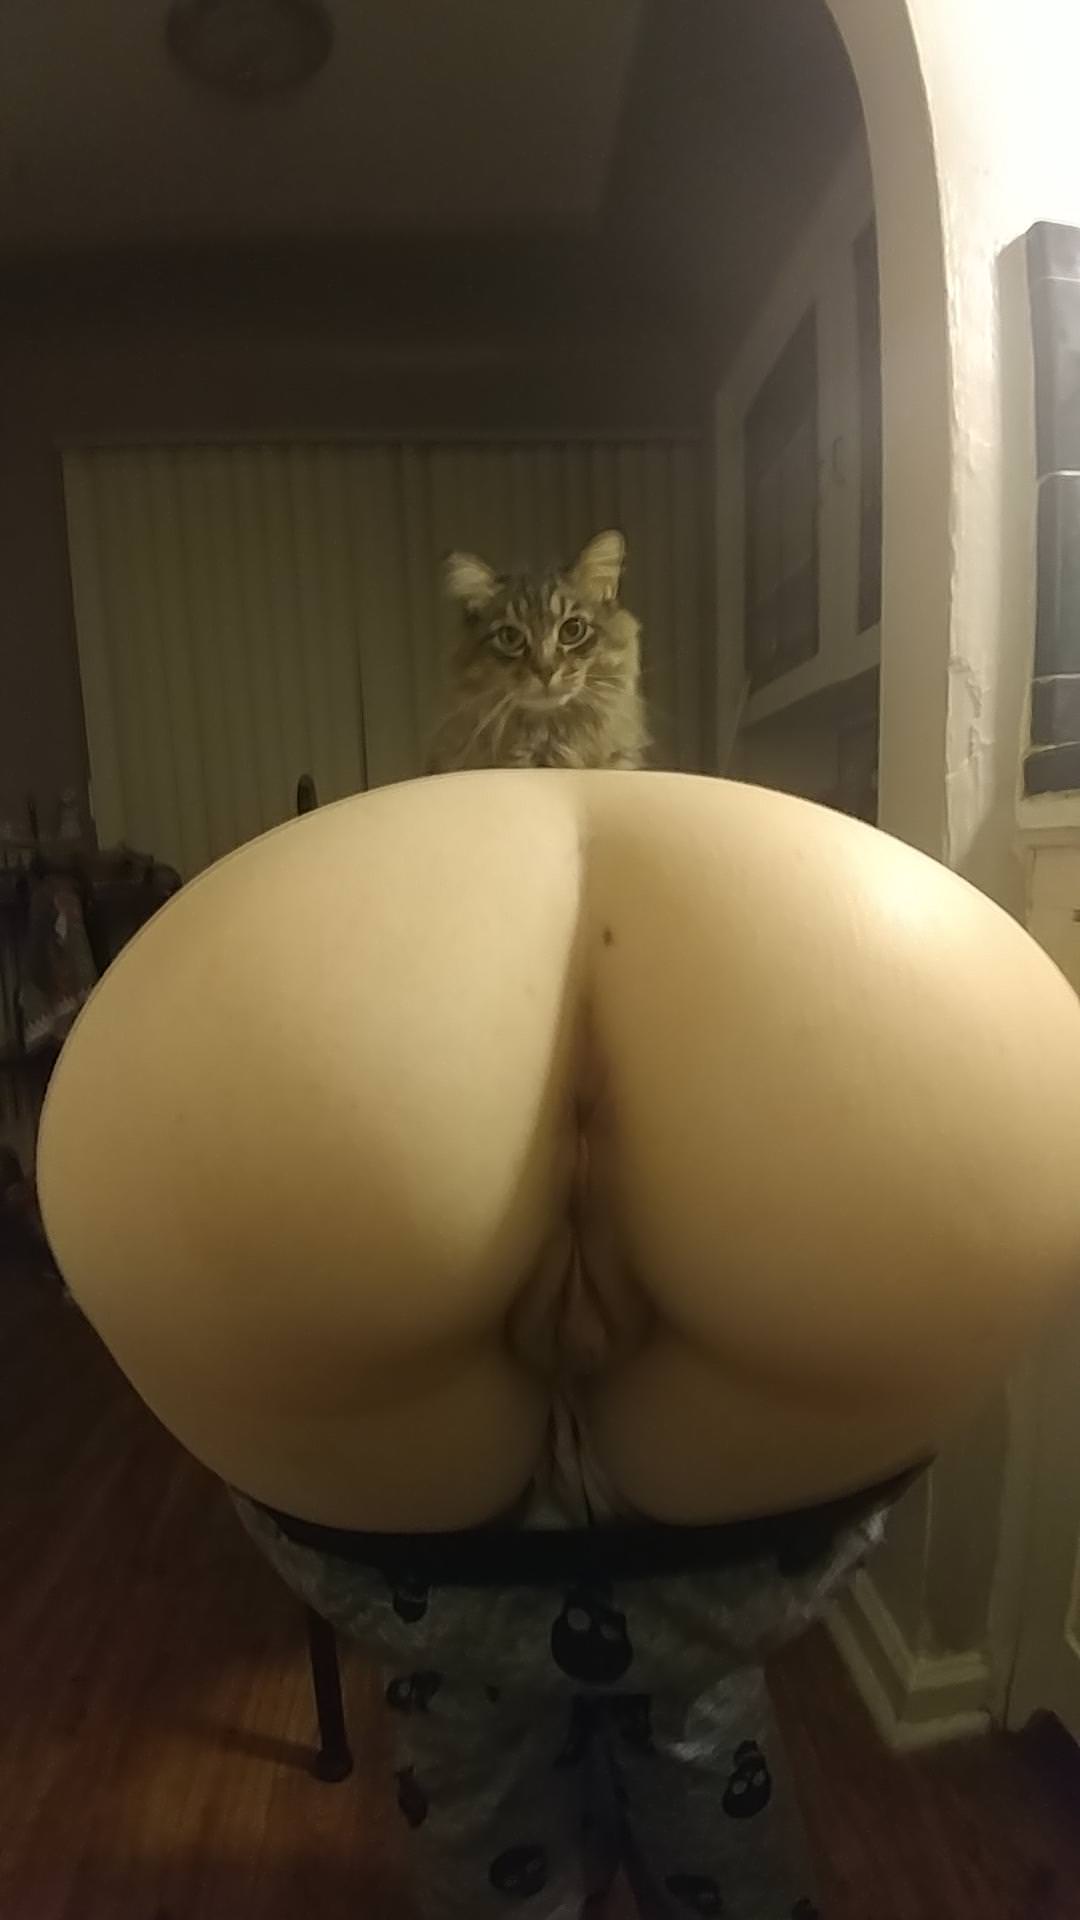 I Think This Belongs Here “pussy”